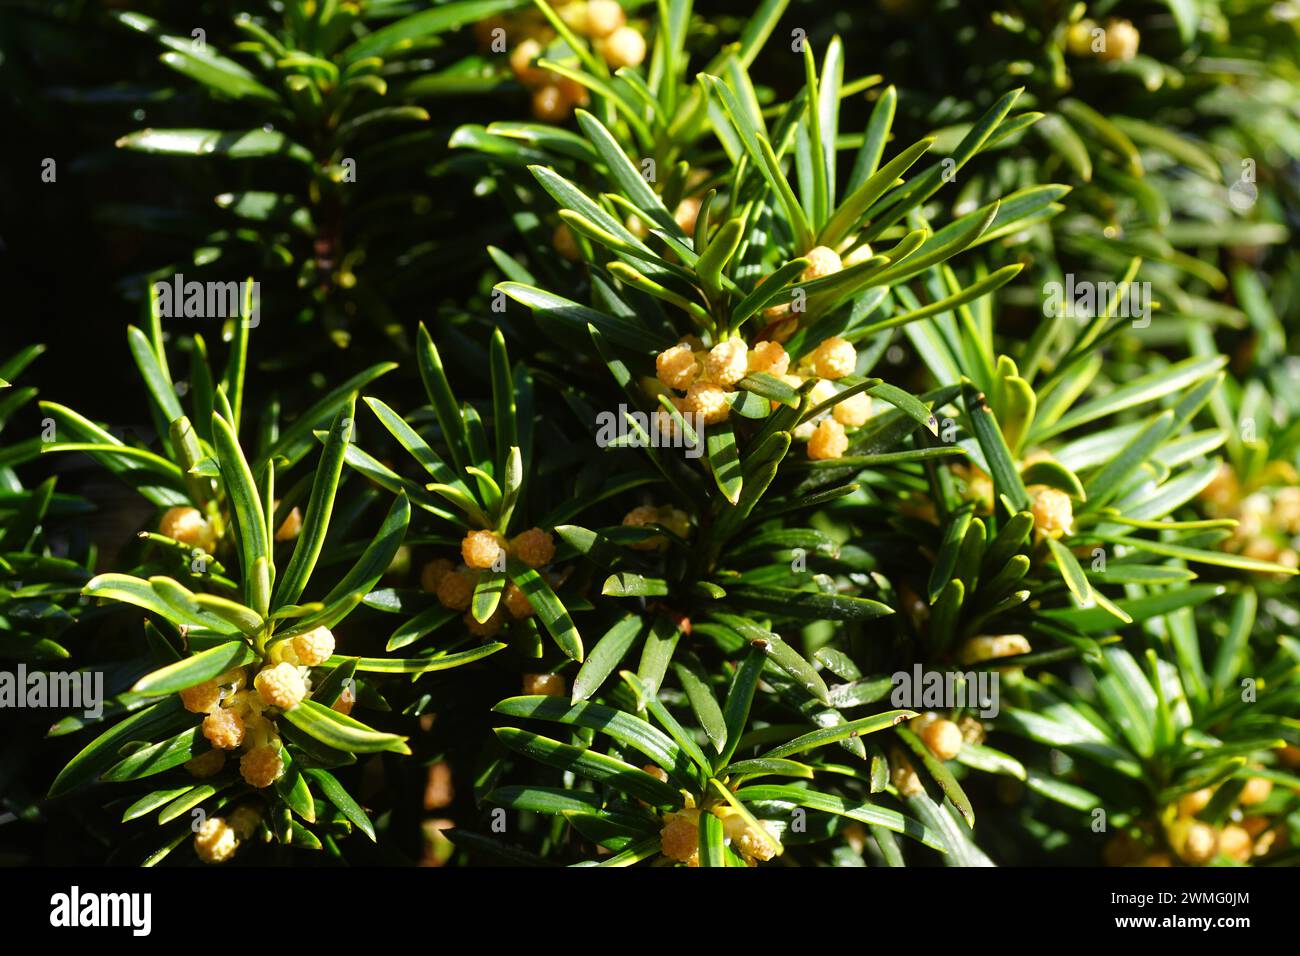 Foliage and flowers of an evergreen Irish Yew Tree (Taxus baccata 'Fastigiata') in a garden in the Dutch village of Bergen. Netherlands, Late winter, Stock Photo